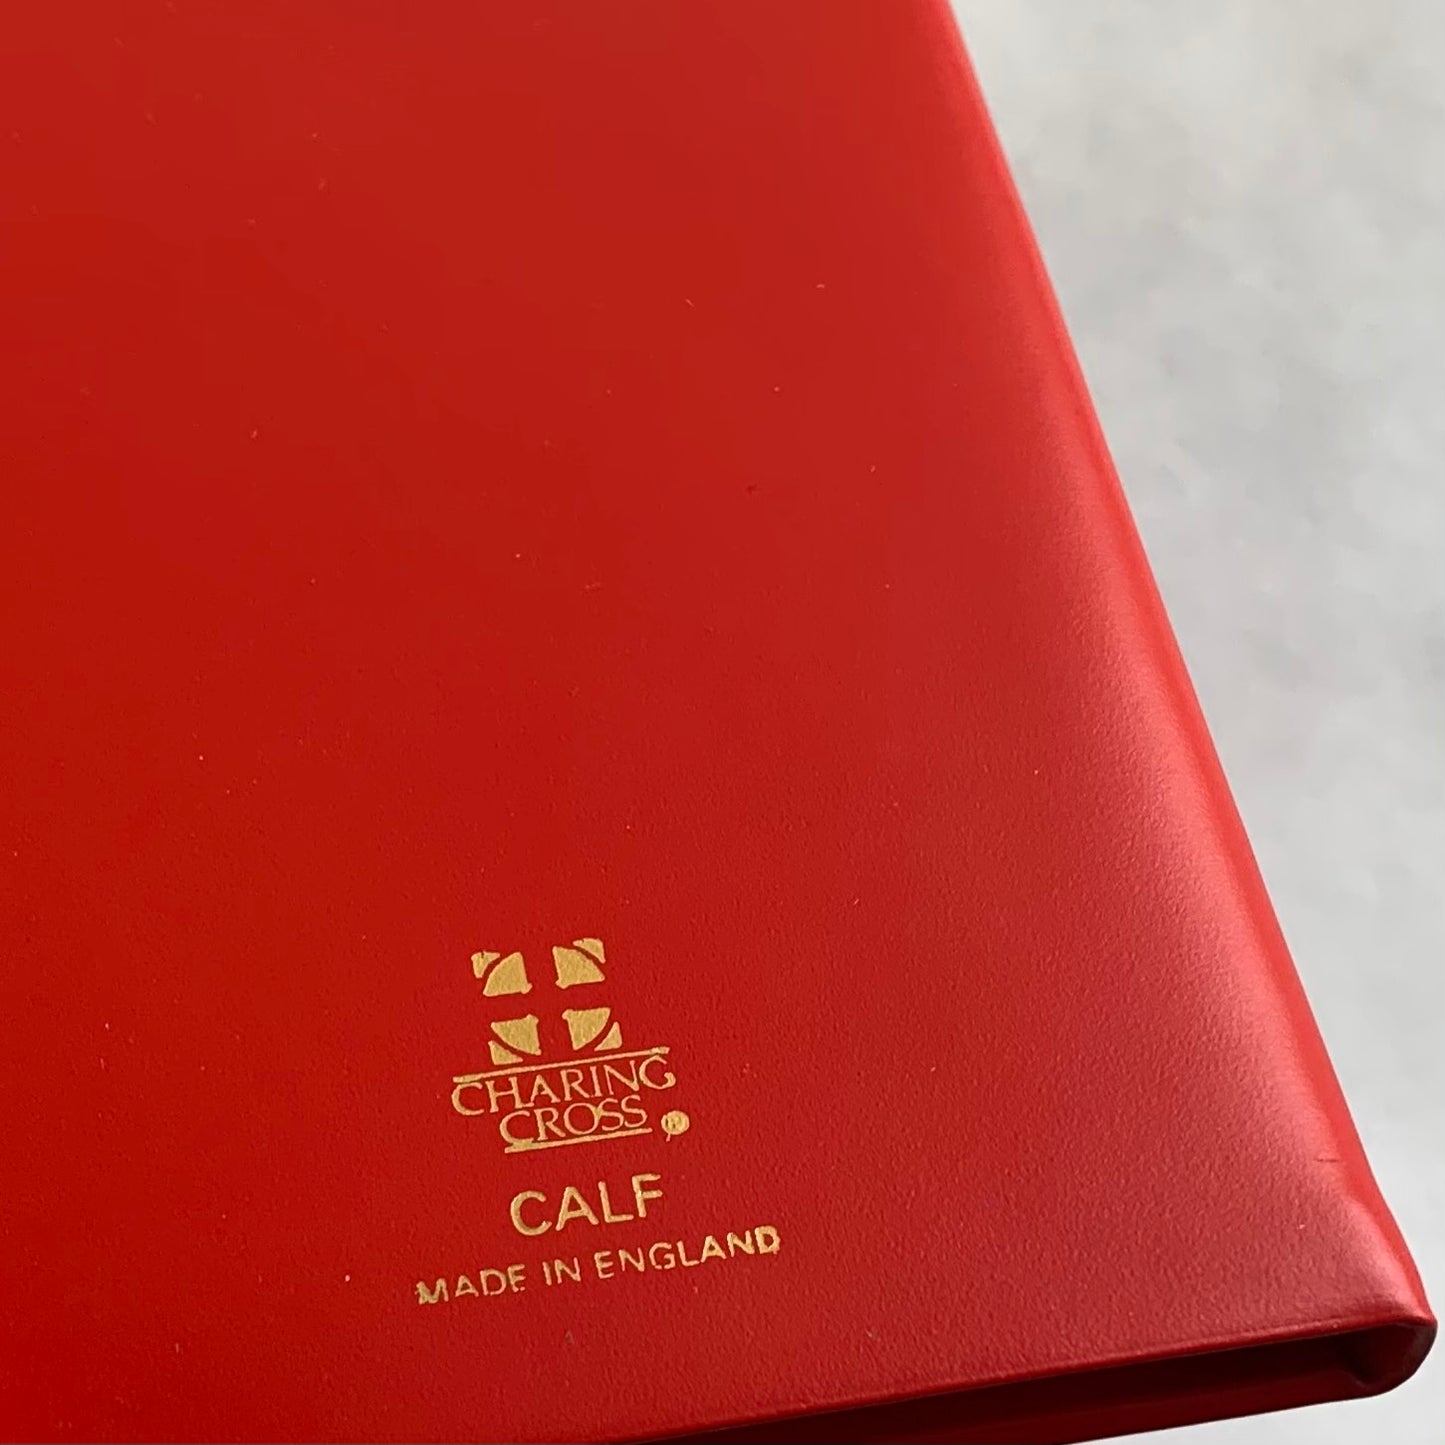 YEAR 2022 CALF Leather Pocket Agenda Book | 5 x 3" | D753C | Scarlet Red